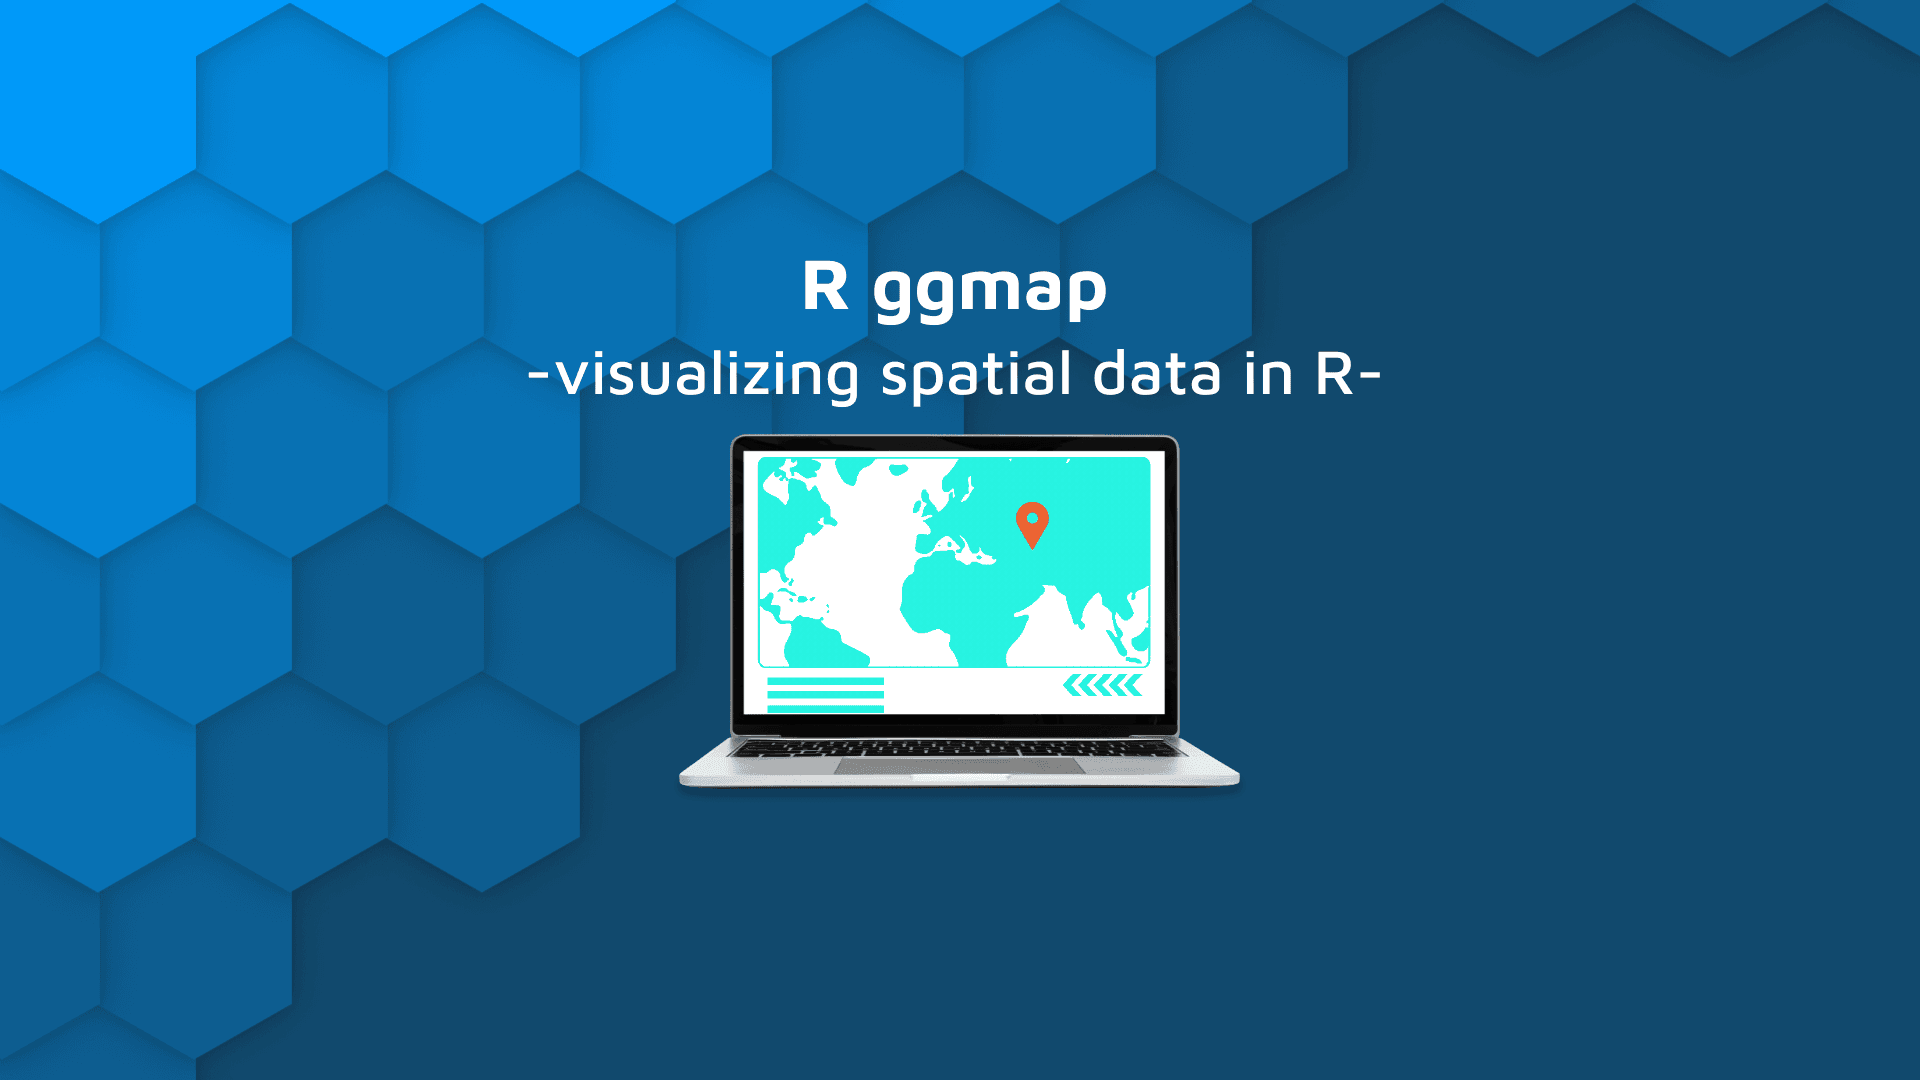 Visualizing spatial data in R with the ggmap R package